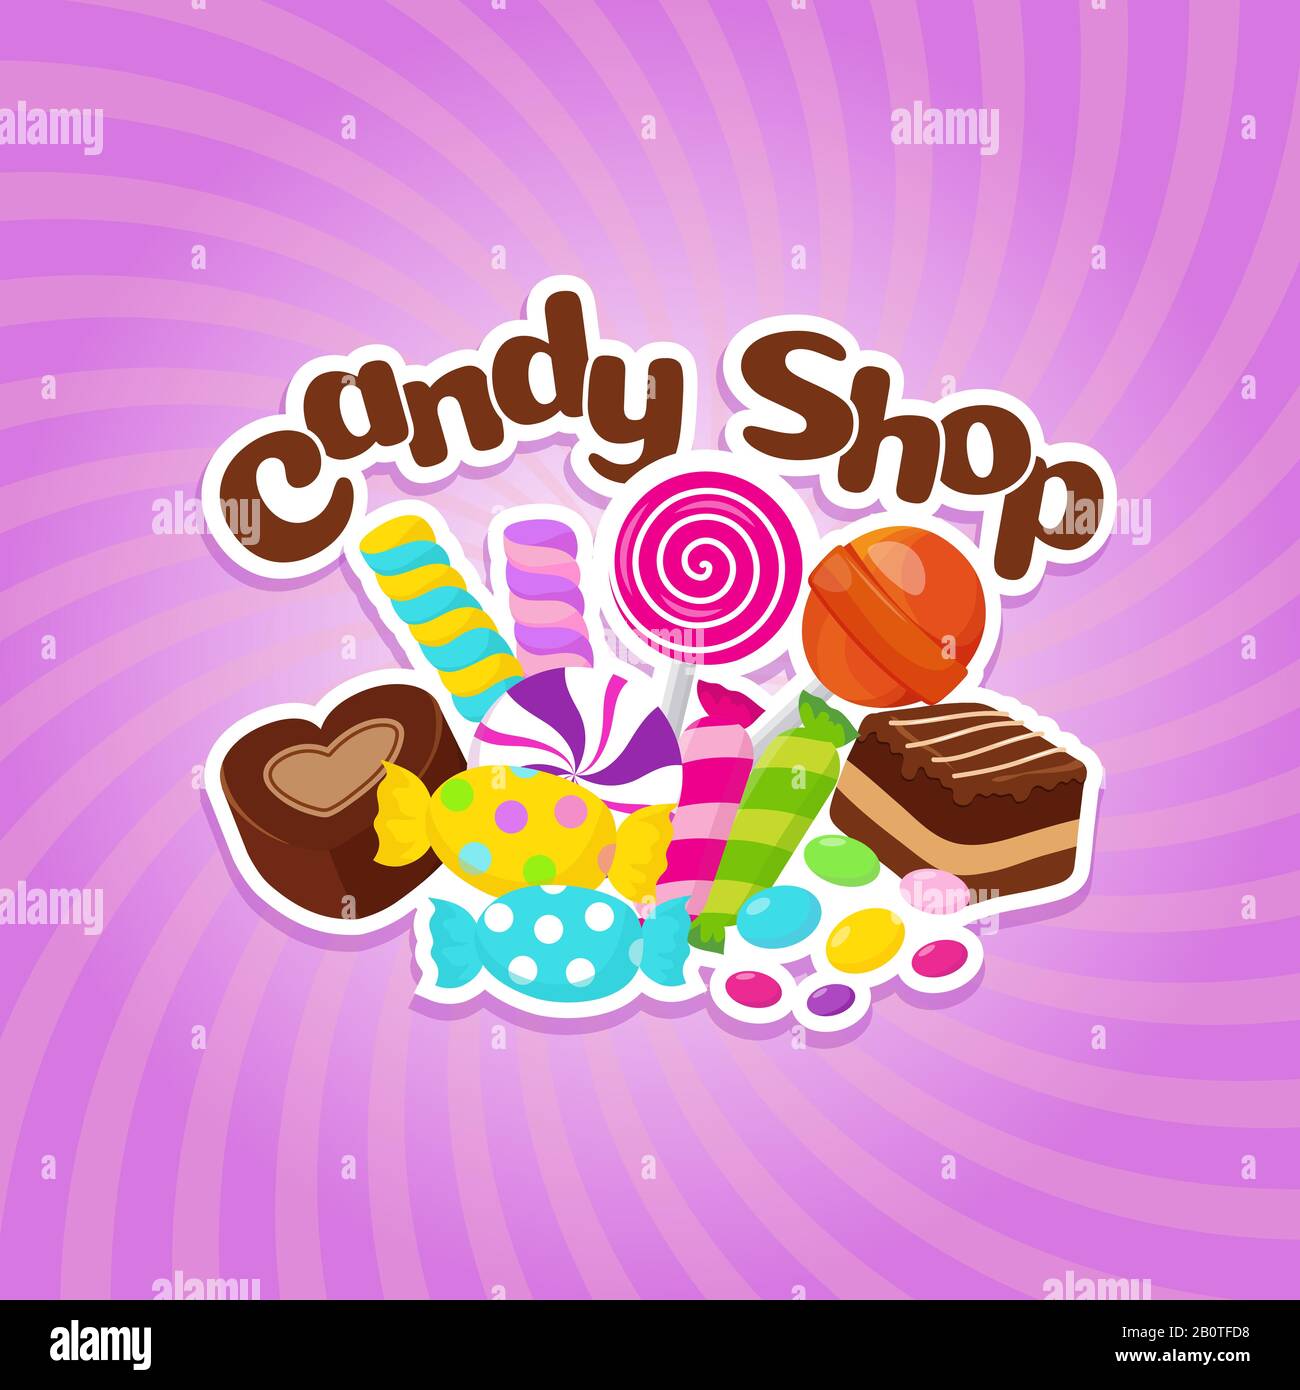 Sugar sweets vector background with colorful candies and lollipops. Sweet lollipop candy, illustration of dessert caramel delicious Stock Vector